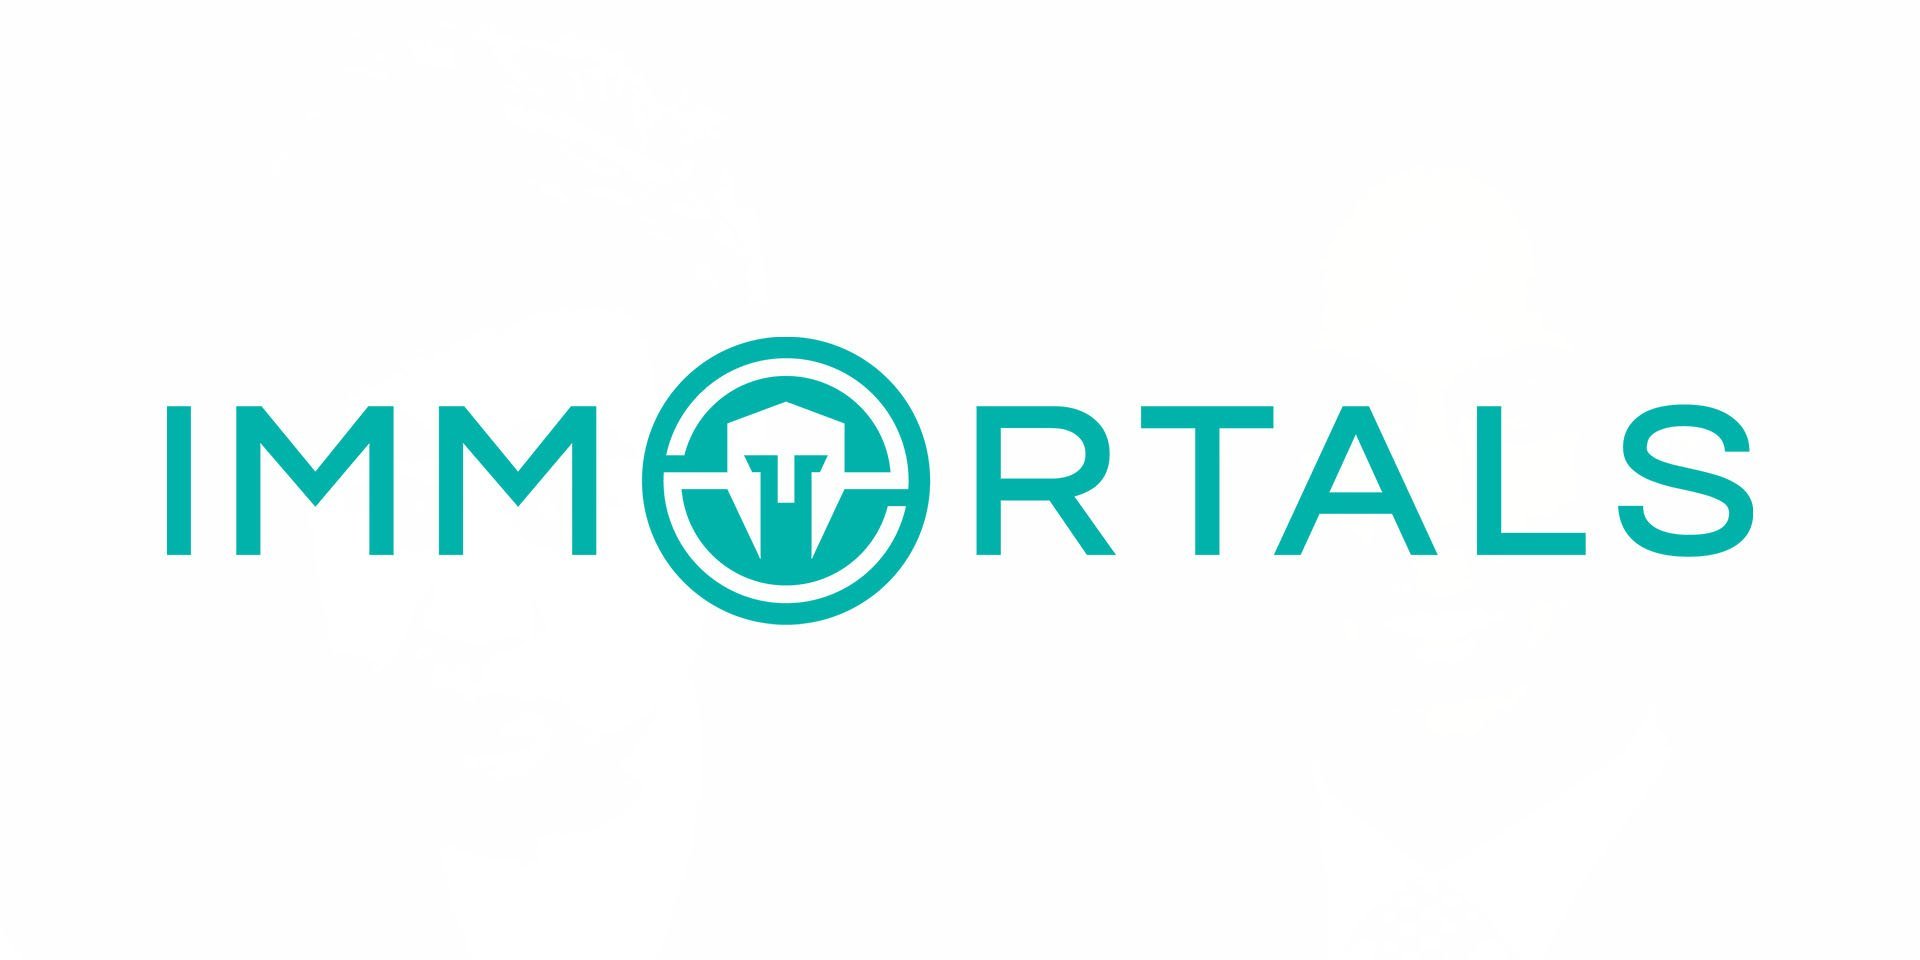 Immortals has parted ways with its oldest LCS player